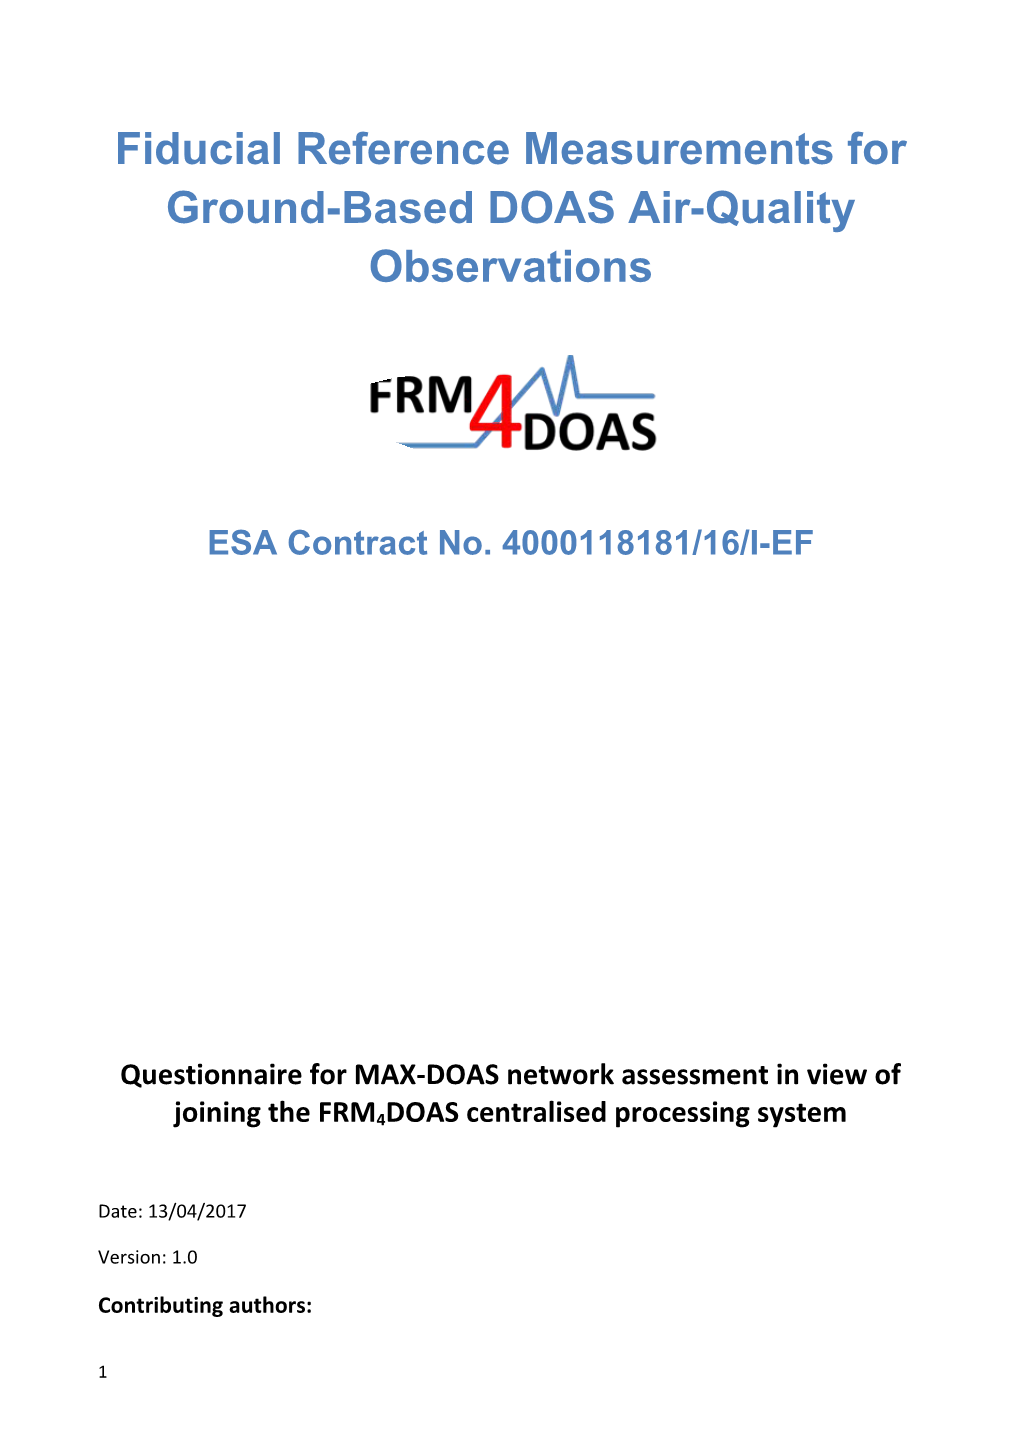 Fiducial Reference Measurements for Ground-Based DOAS Air-Quality Observations